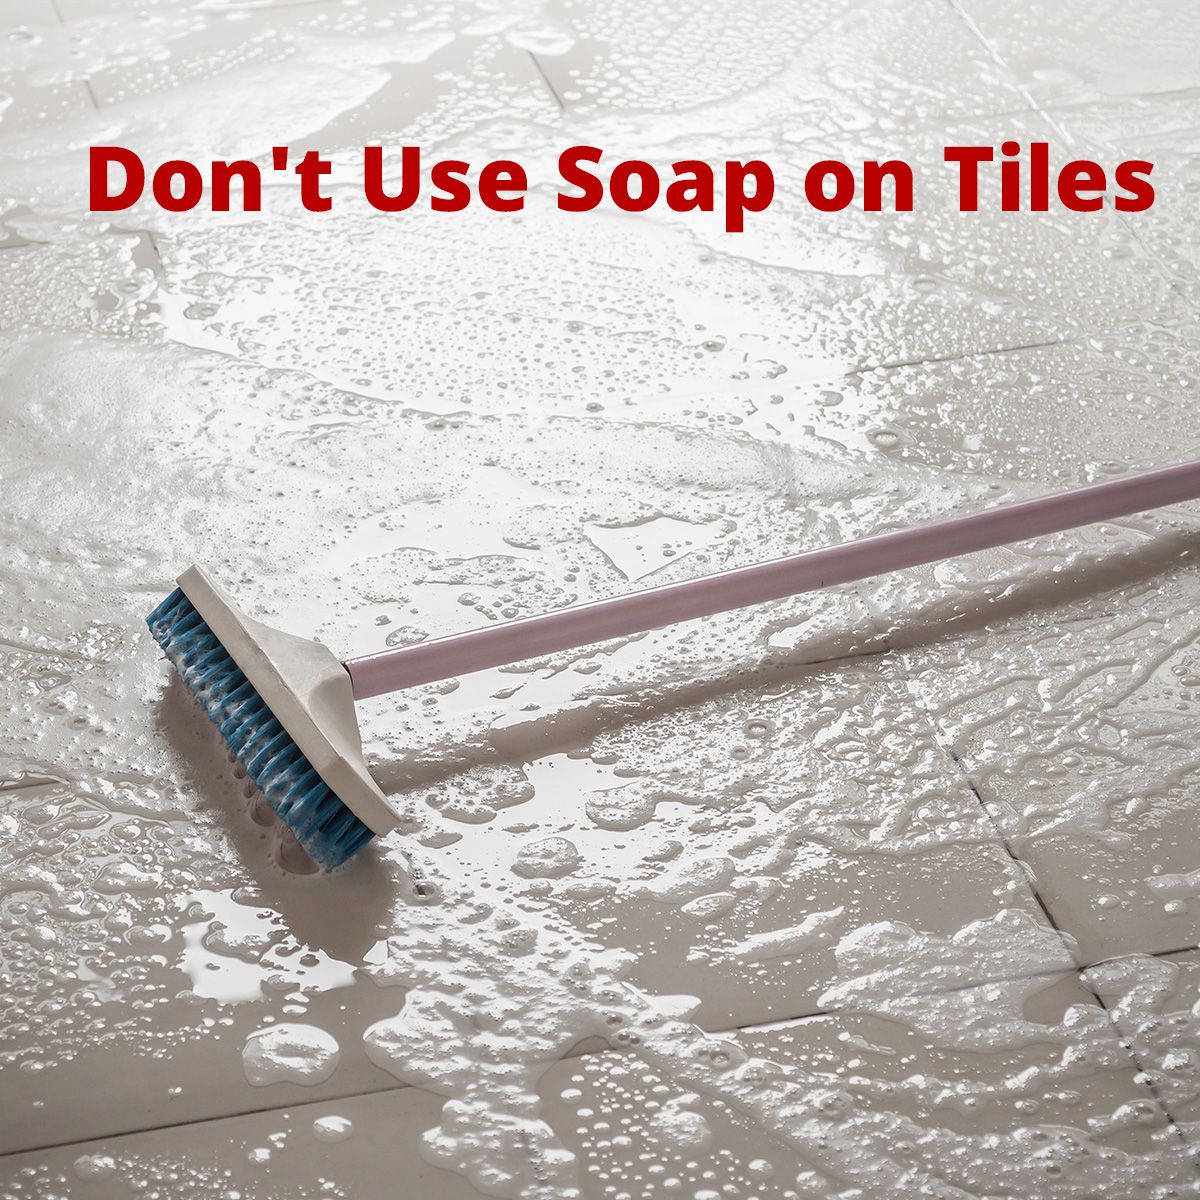 Don't Use Soap on Tiles